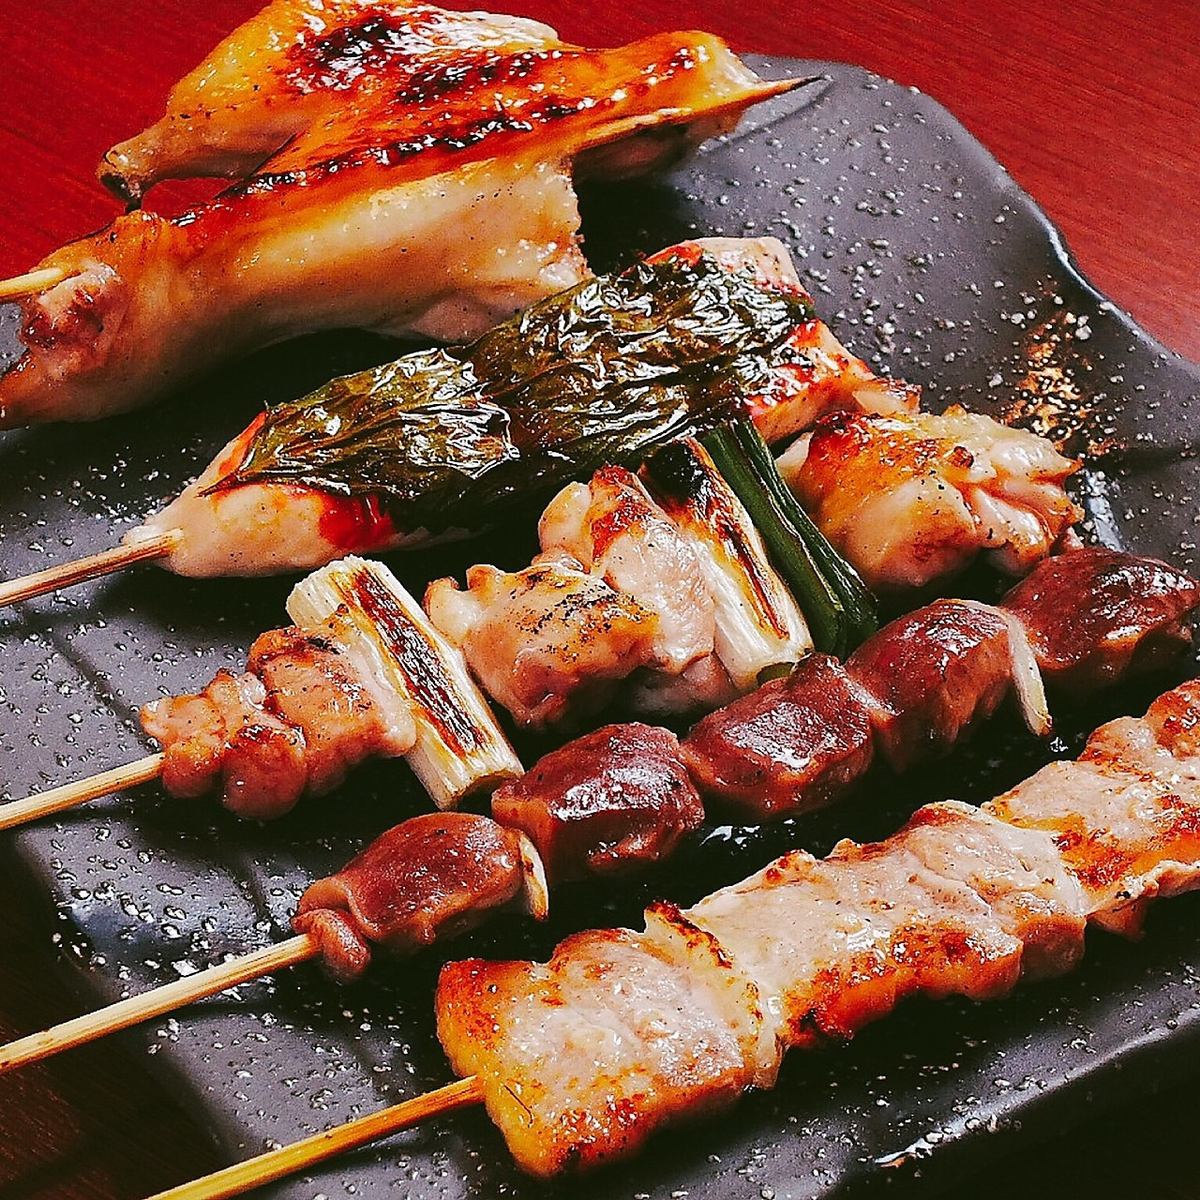 [Private room/smoking allowed] Yakitori/fresh fish + Japanese food eating and drinking plan 3 hours 3000 yen